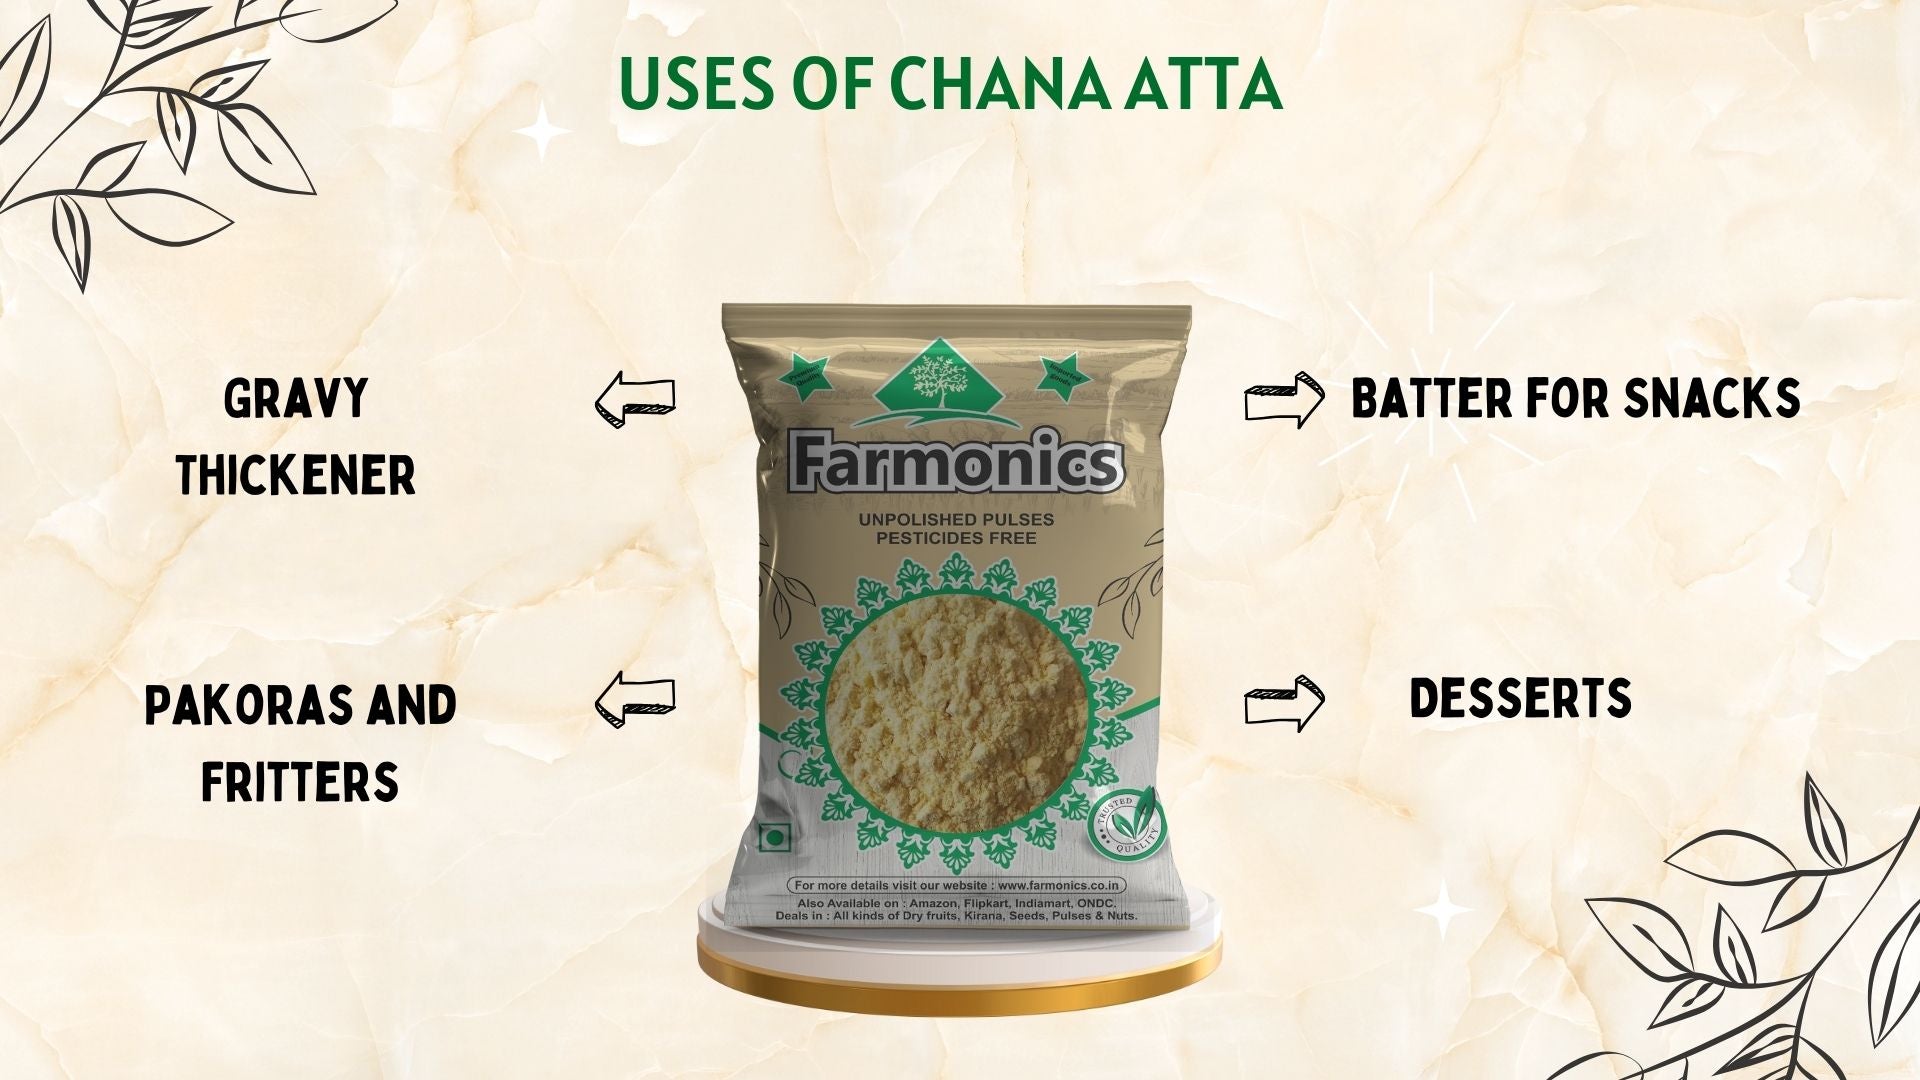 here are the list of uses of chana atta 